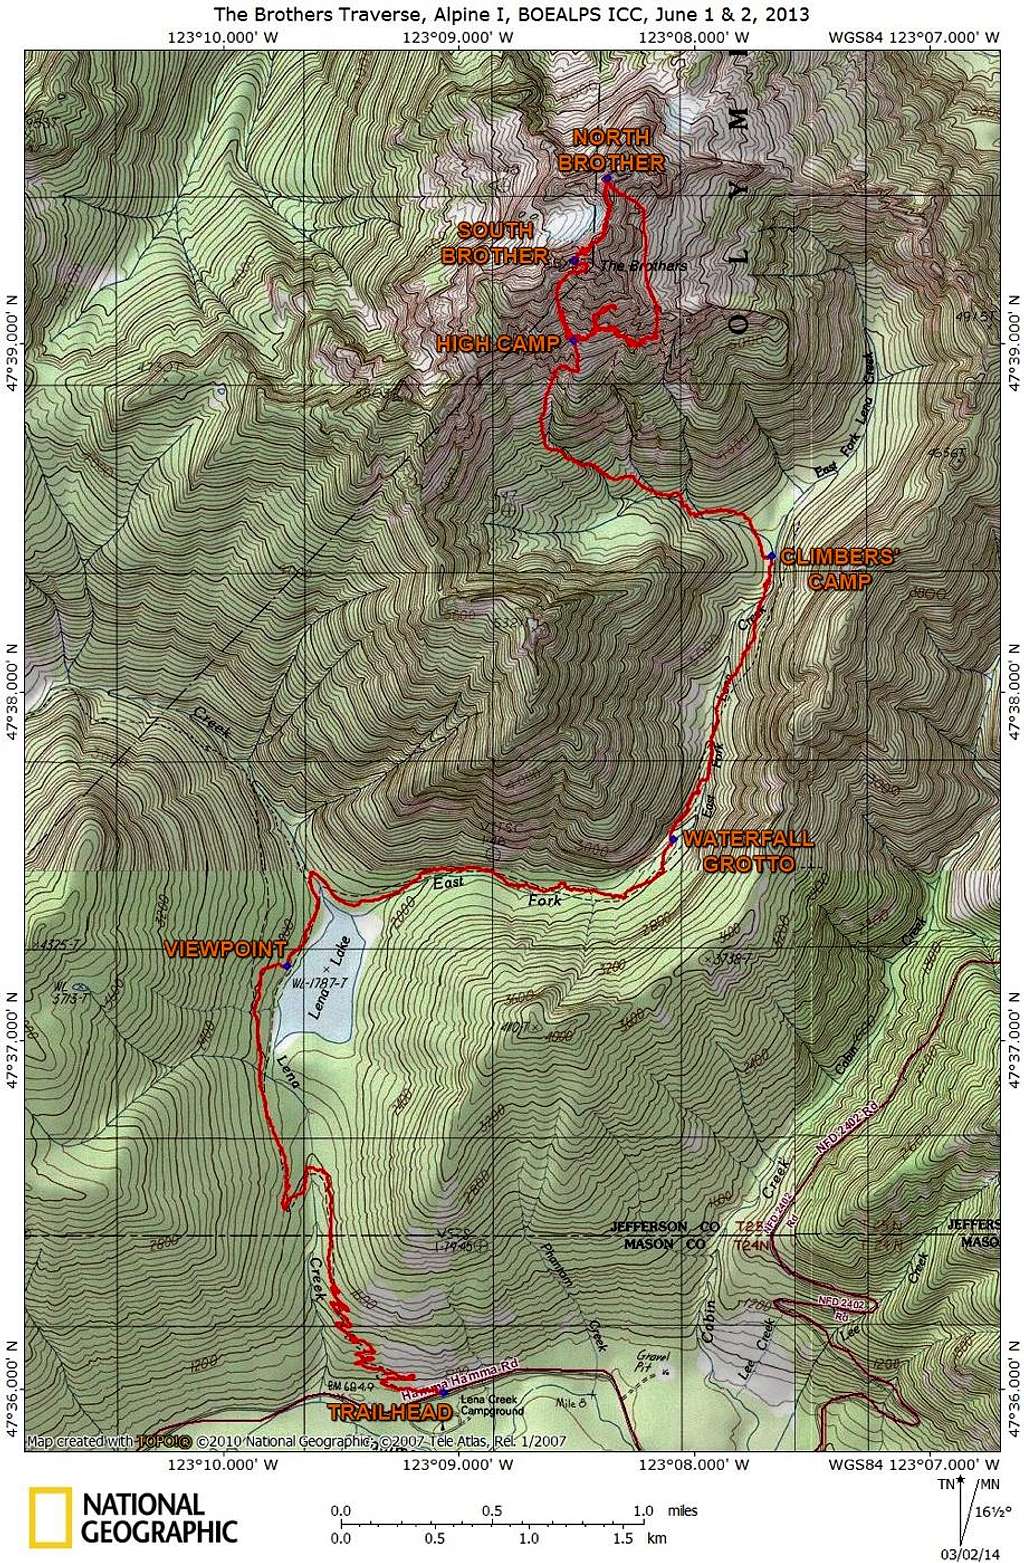 The Brothers Traverse Route